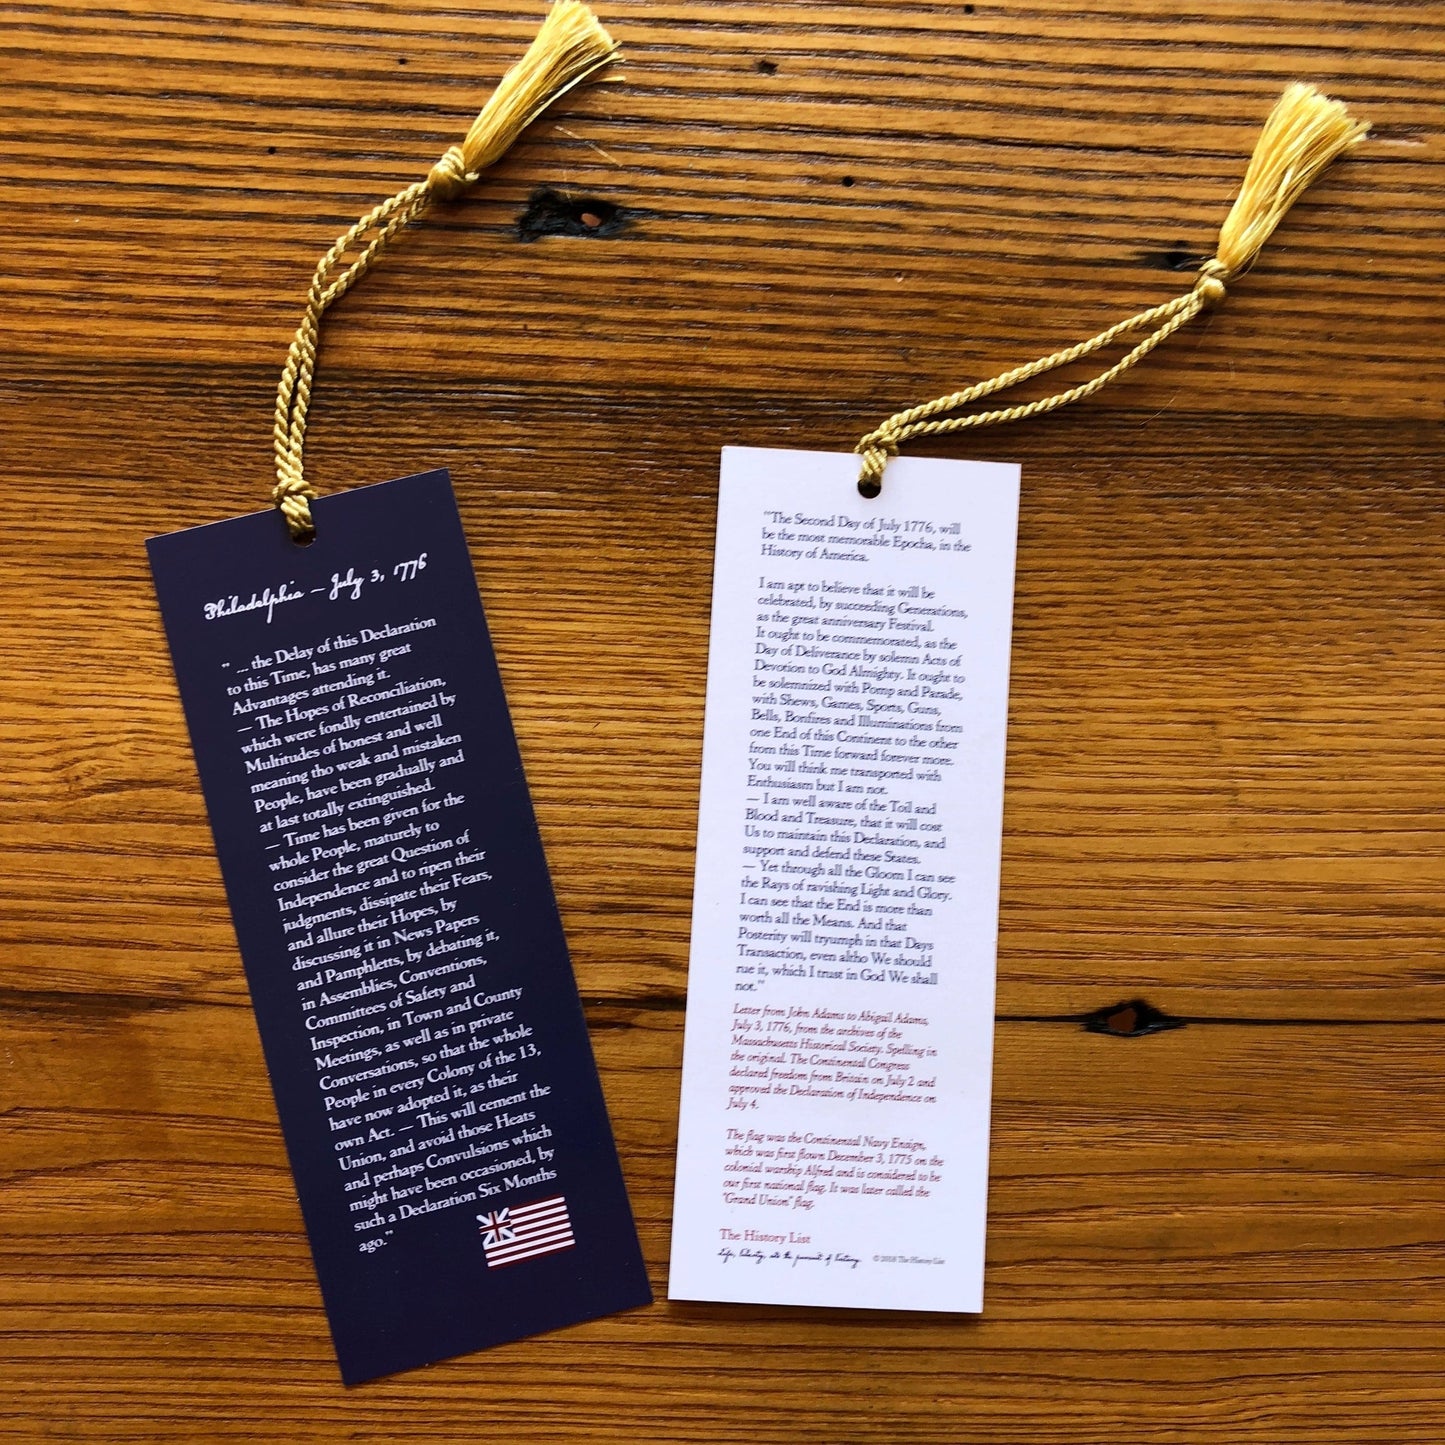 We hold these truths - July 4, 1776” Bookmark with tassel